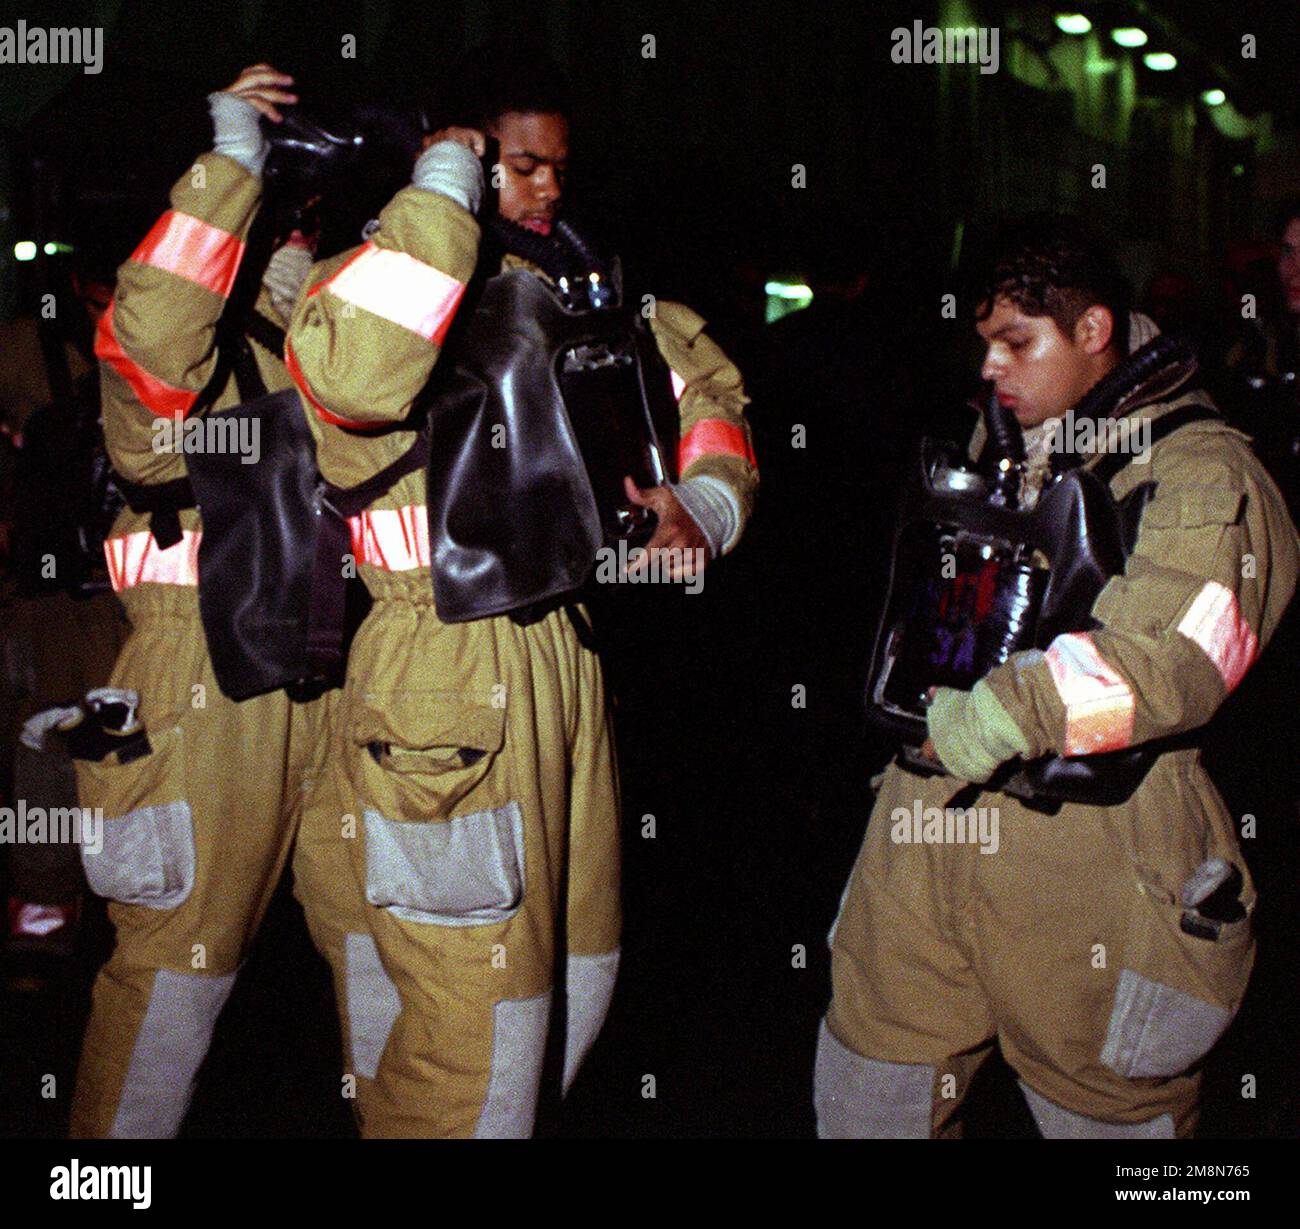 Fire party members aboard the auxiliary command ship USS CORONADO (AGF 11) assist one another in suiting up to fight a simulated fire during a general quarters drill as part of exercise RIMPAC 98. Subject Operation/Series: RIMPAC '98 Country: Pacific Ocean (POC) Stock Photo